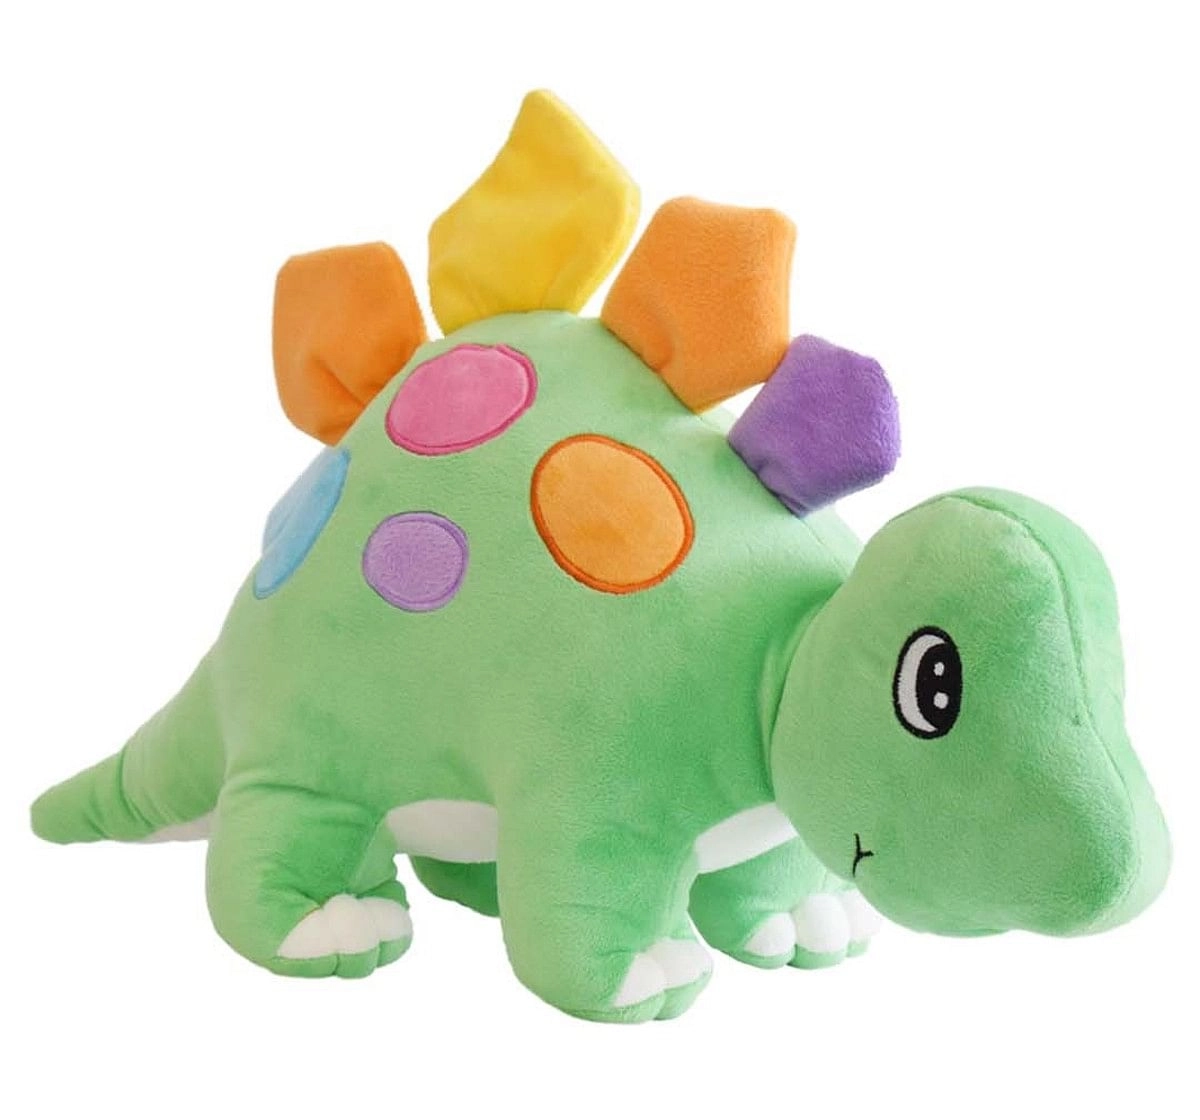 Adorable Stuffed Plush Dinosaur By Mirada, Soft Toys For Kids Of All Ages, 3Y+, Green, 50Cm